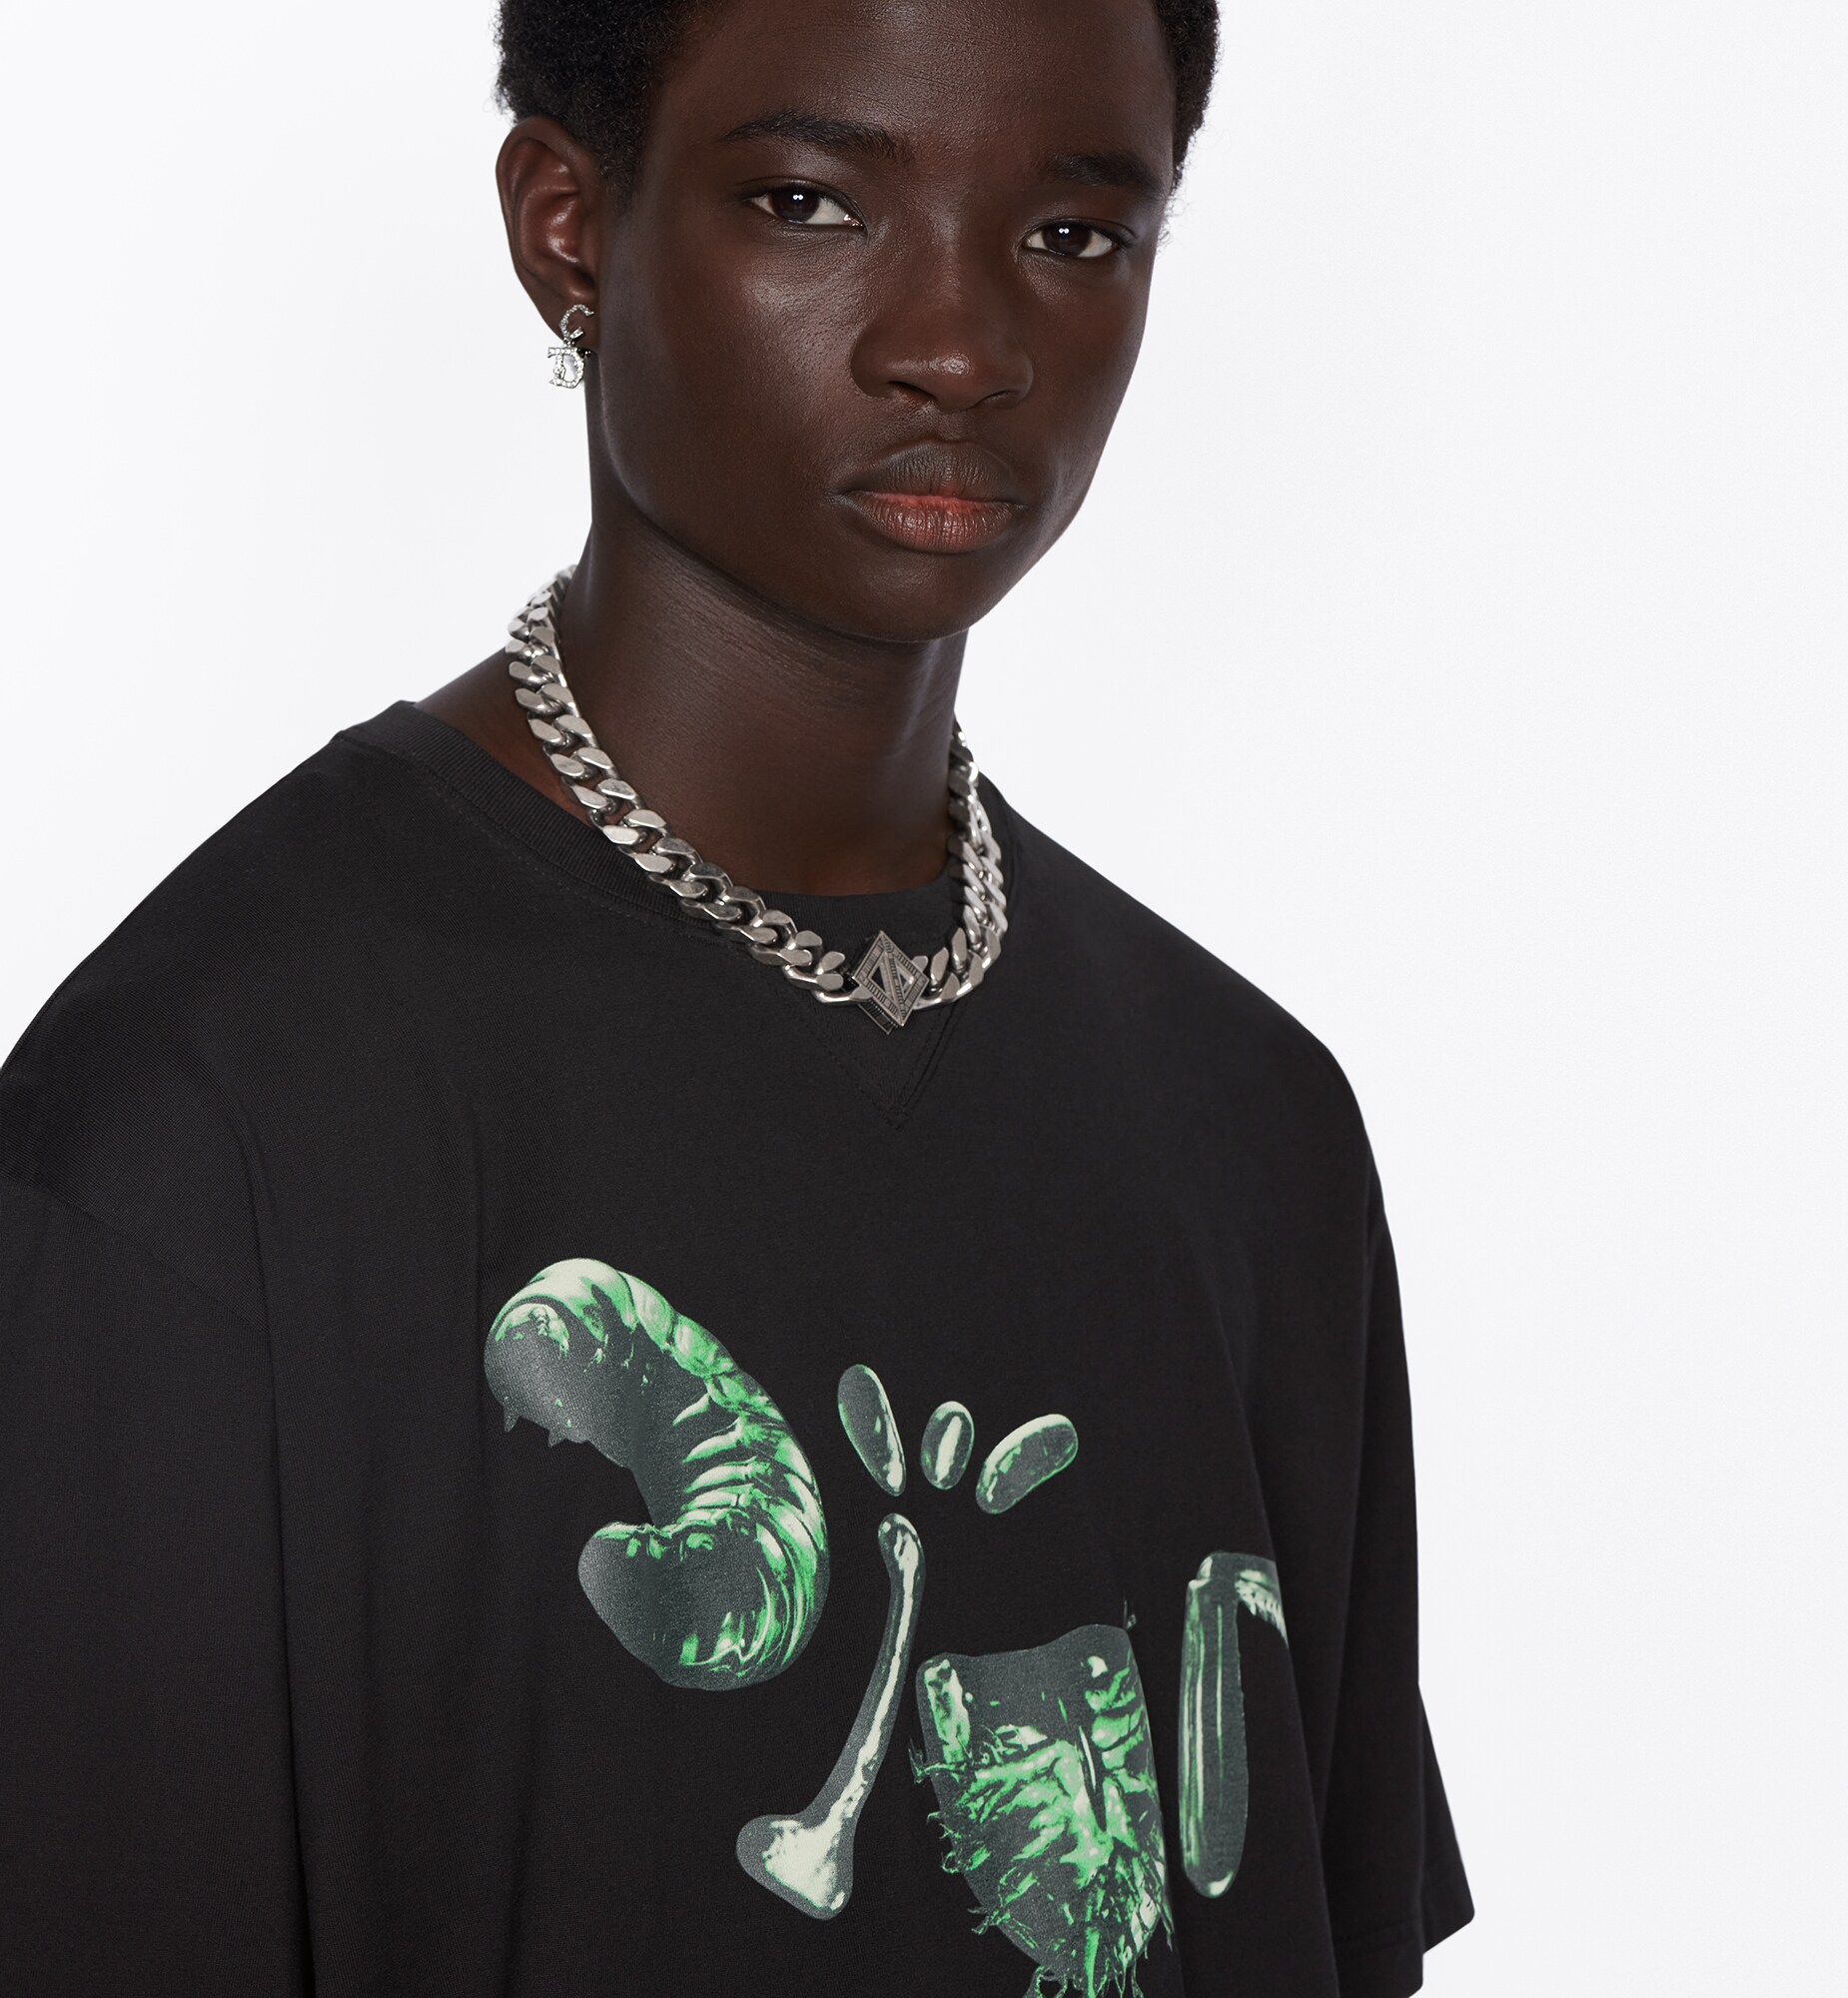 Cactus Jack x Dior Collection Now Available